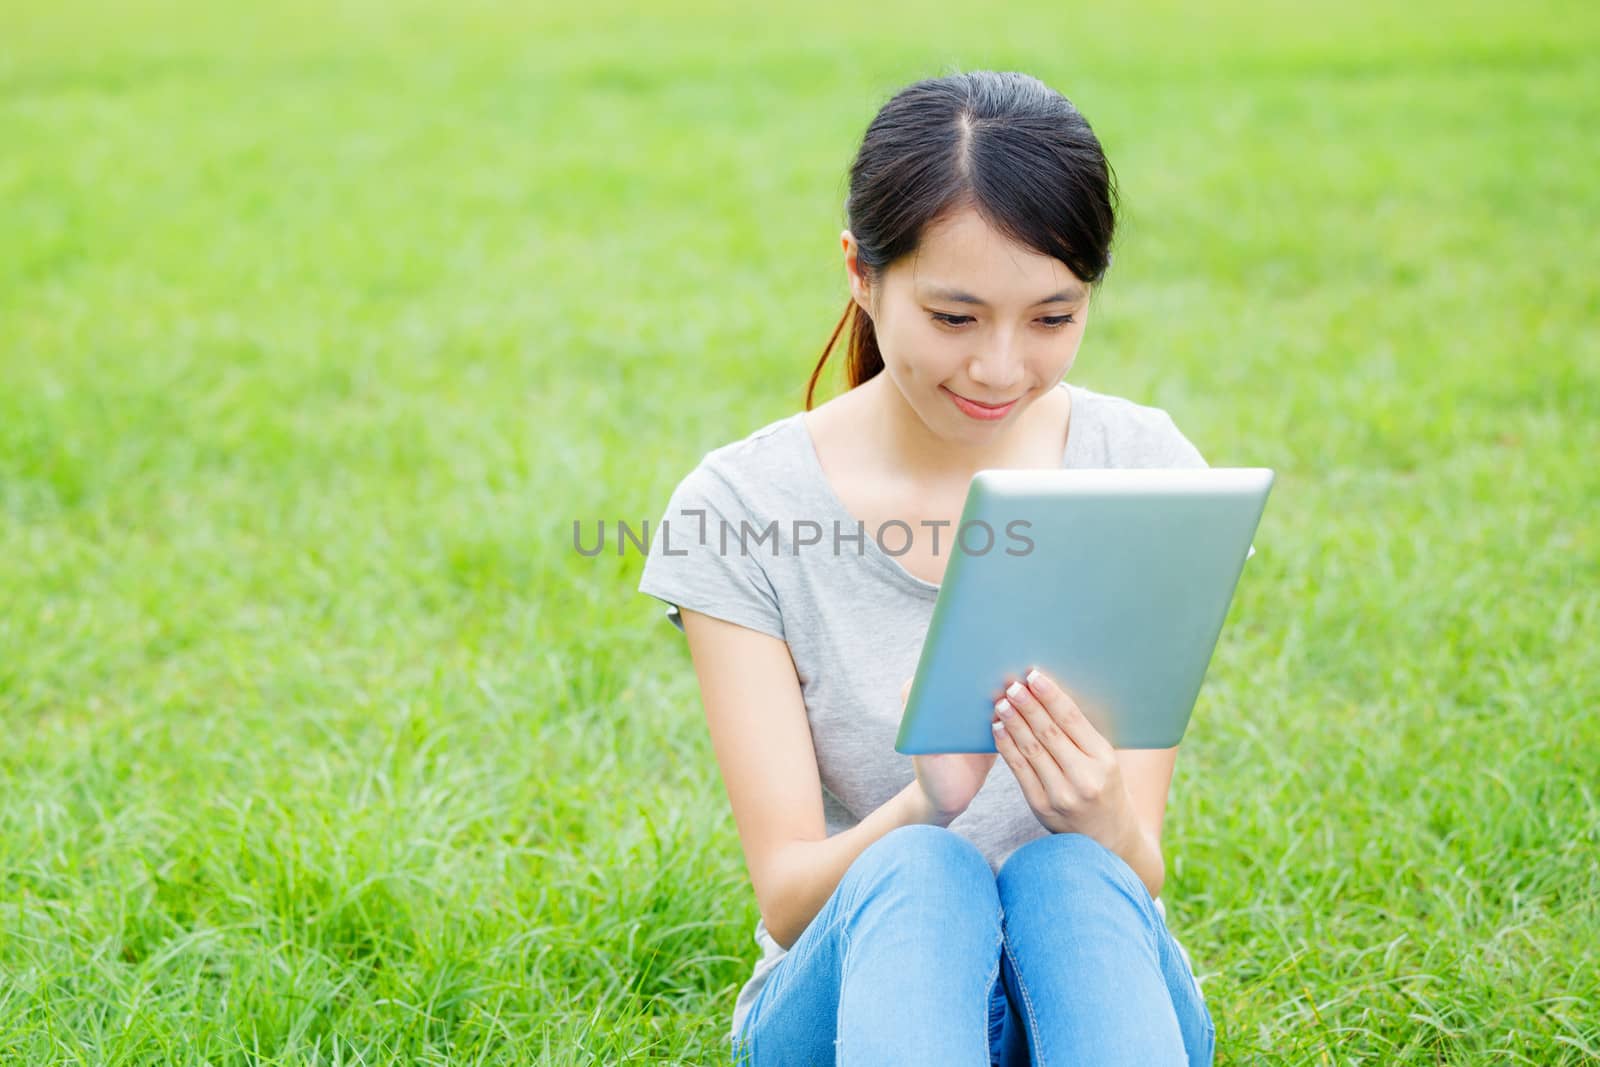 Woman sitting on grass with tablet computer